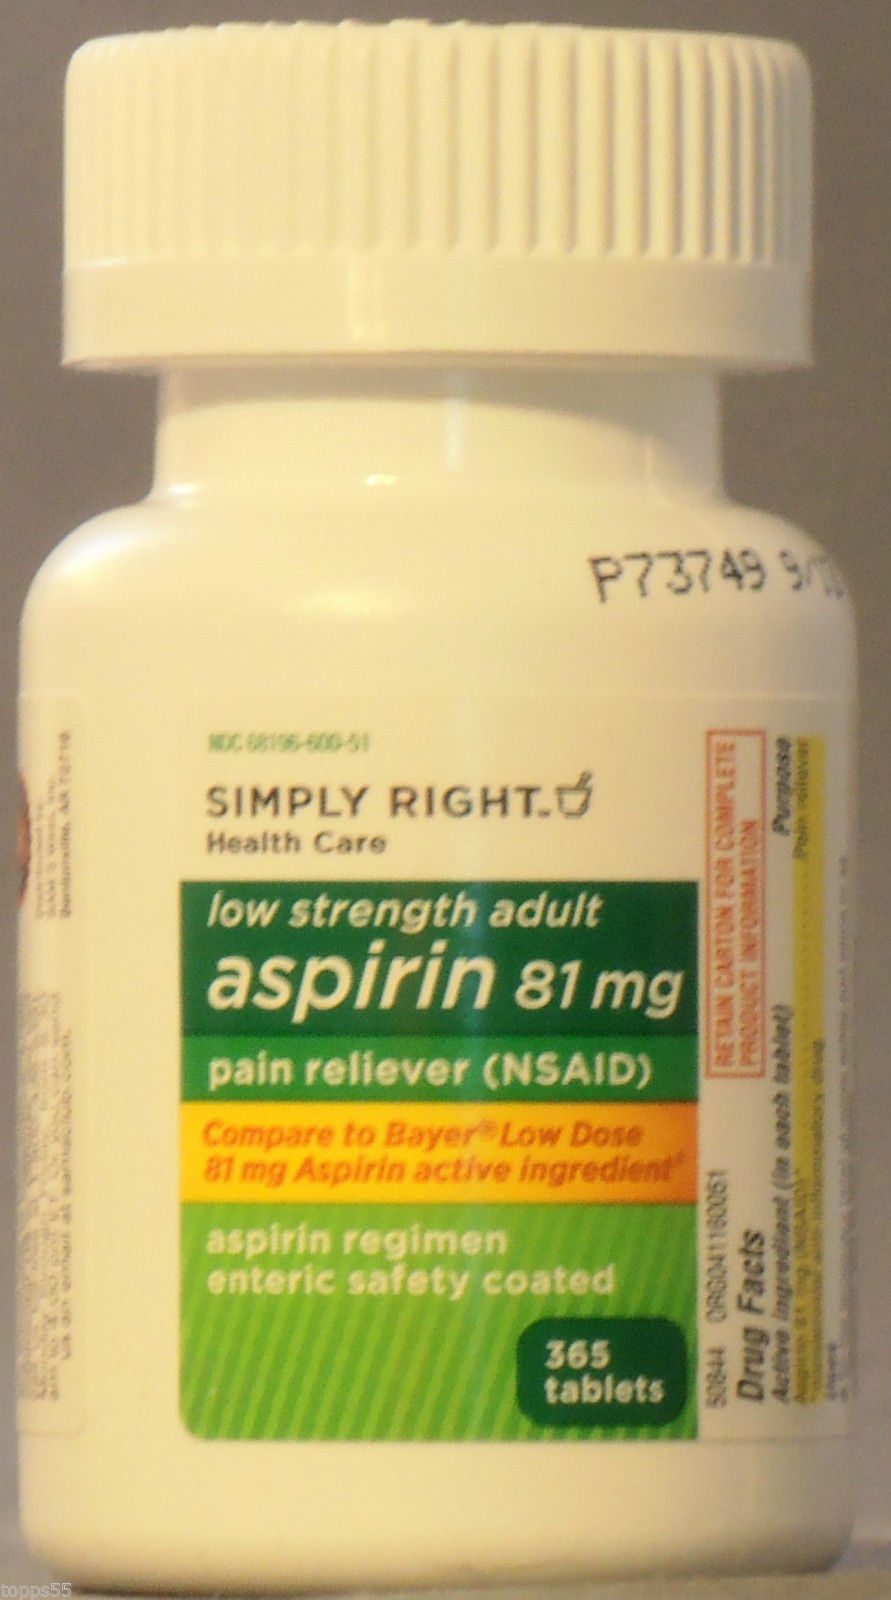 365 ct Generic Low Dose Adult Aspirin 81mg Enteric Safety Coated Sealed New -- US Delivery